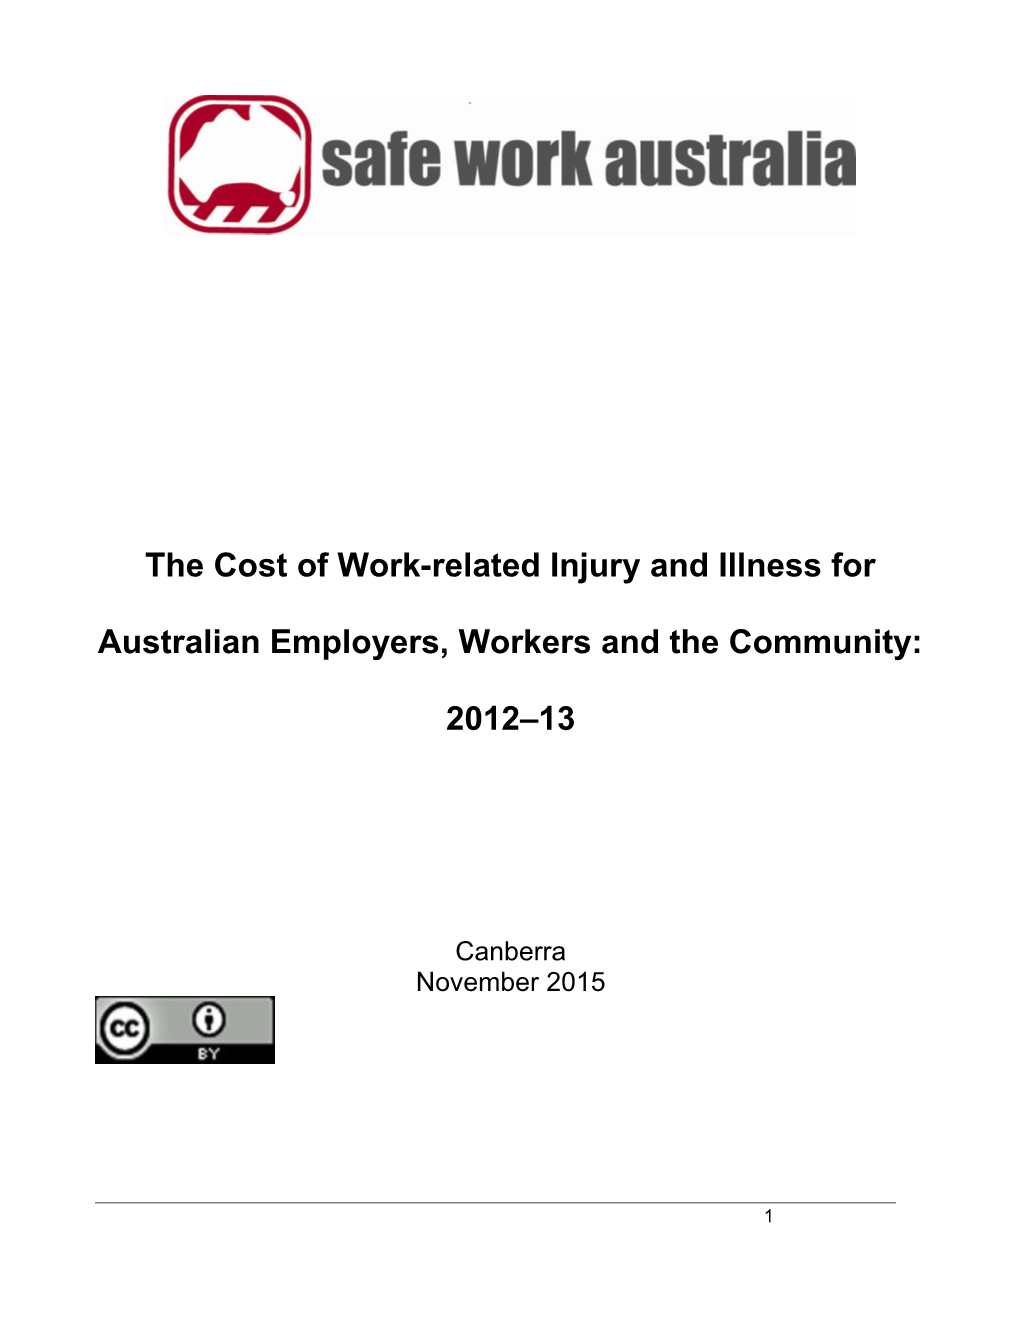 The Cost of Work-Related Injury and Illness for Australian Employers, Workers and the Community